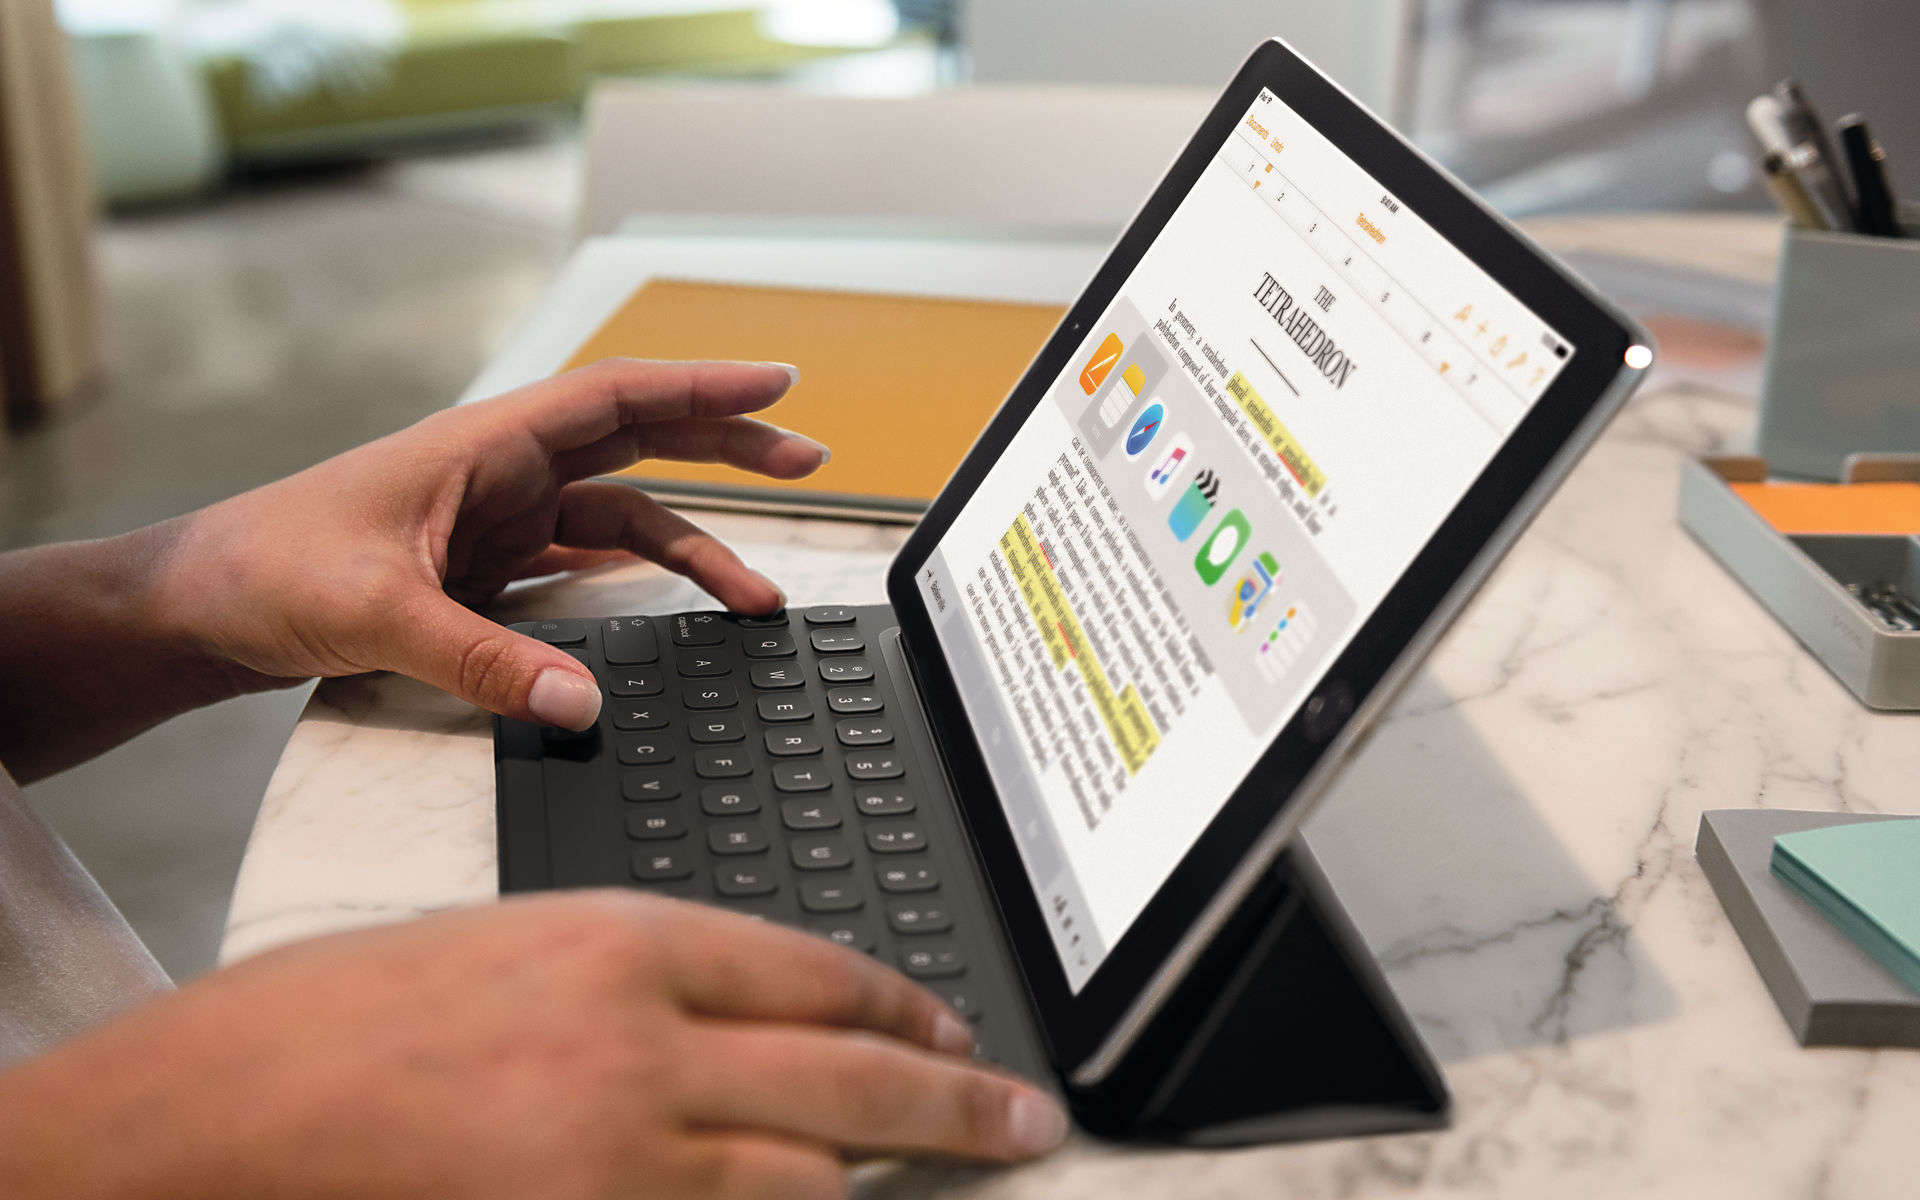 The 9.7-inch iPad Pro works with Apple's Smart Keyboard.